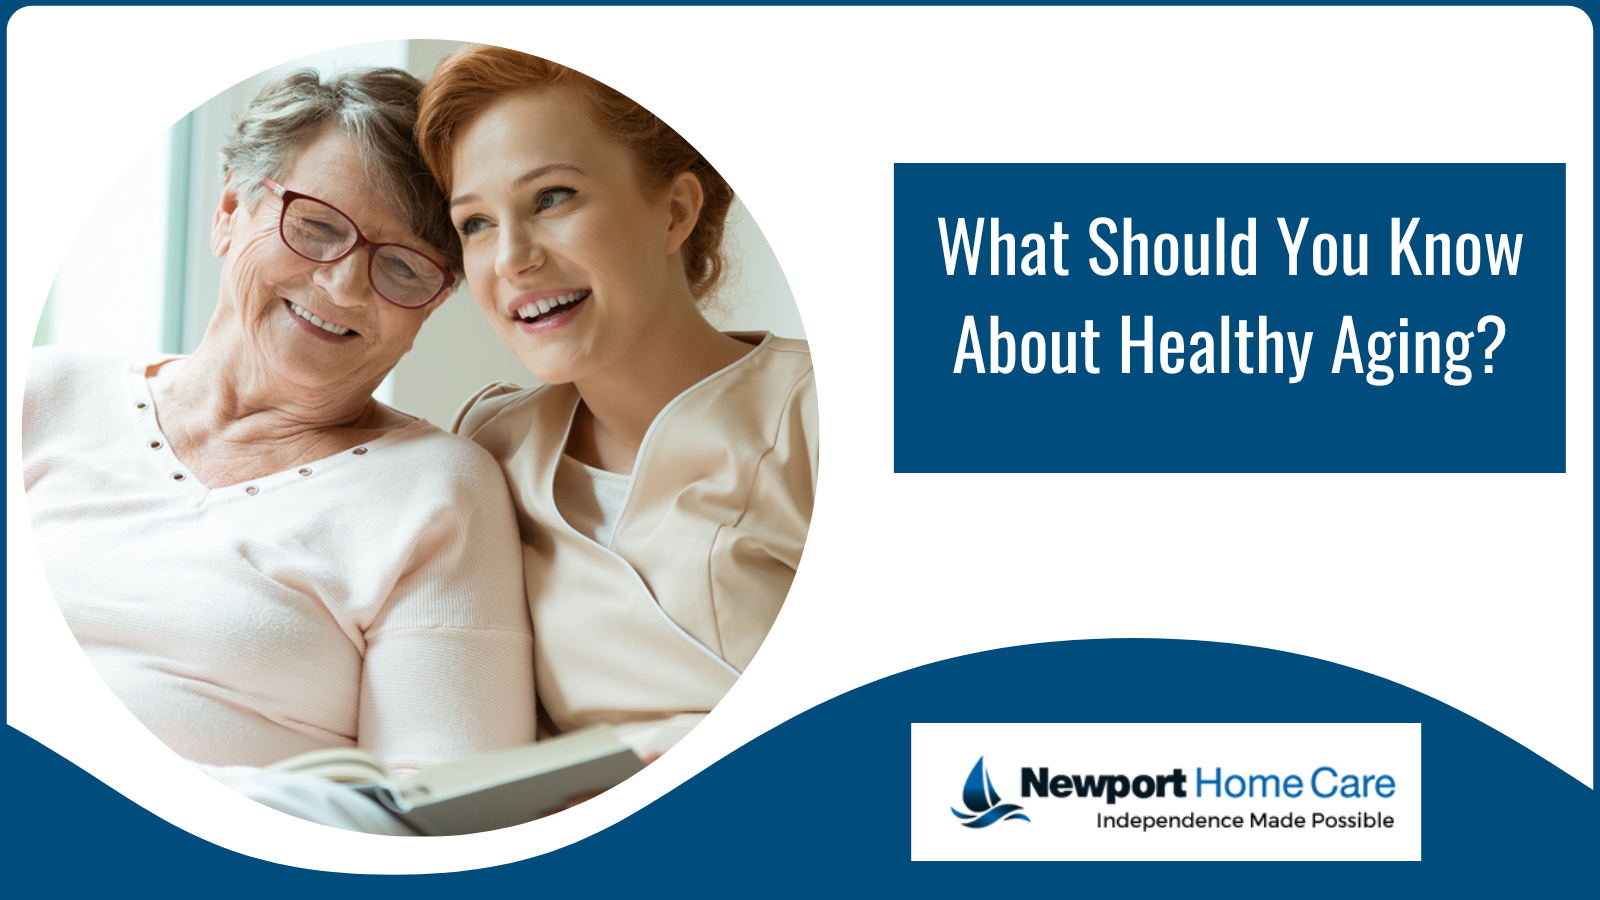 What Should You Know About Healthy Aging?